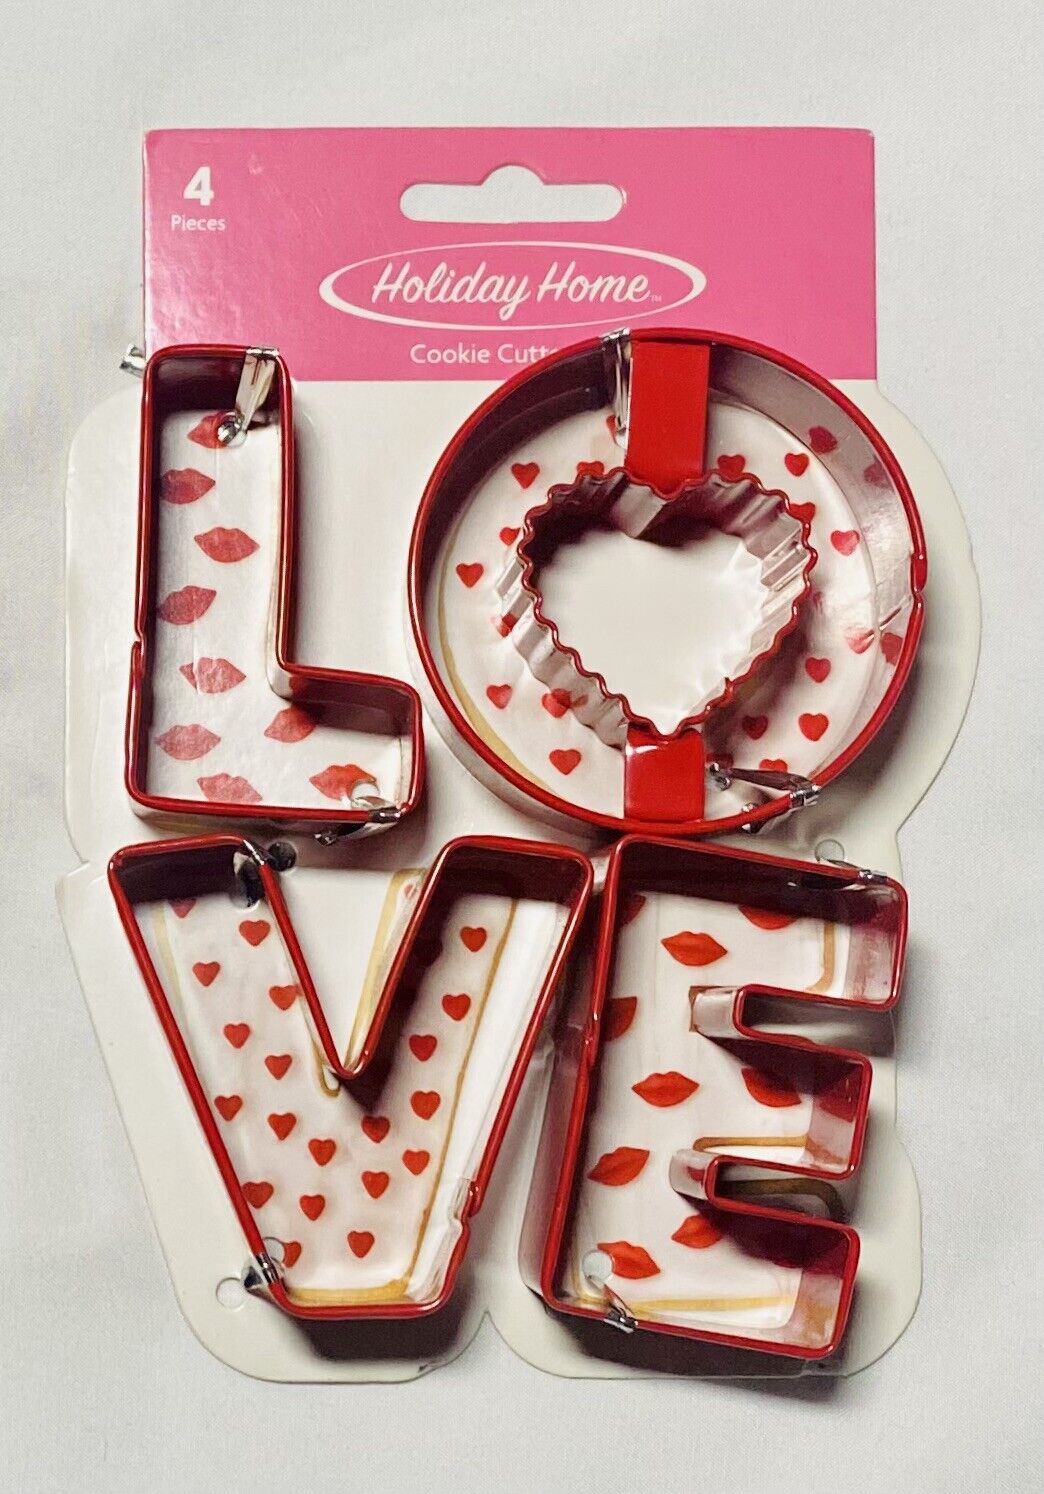 Holiday Home Cookie Cutters Metal  kitchen Valentine 4 pcs. Spells L-O-V-E, New 